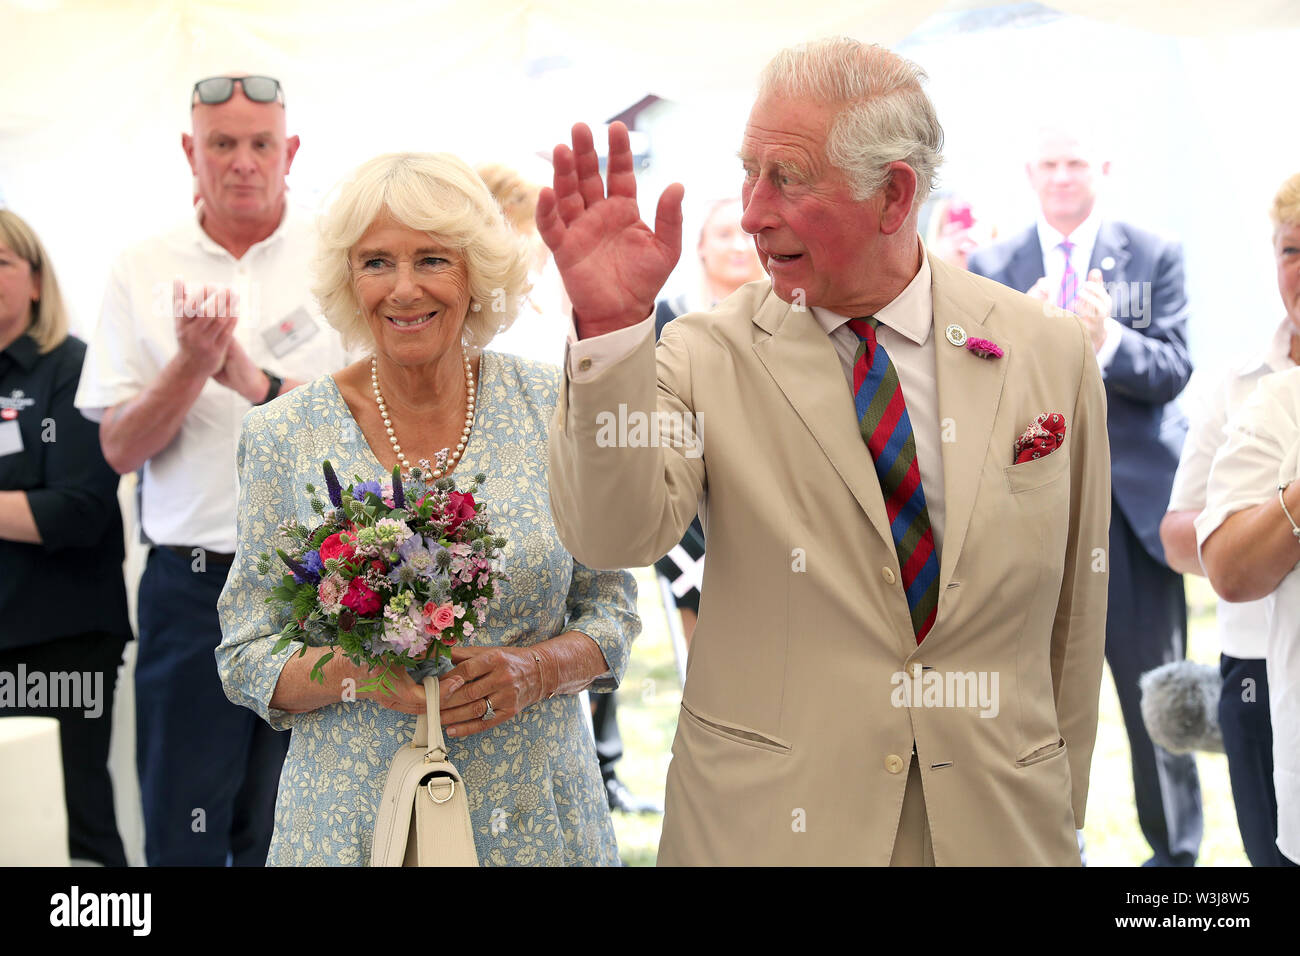 The Prince of Wales and the Duchess of Cornwall during a garden party to celebrate the 50th anniversary of Ginsters bakery in Callington, as part of their visit to Cornwall. Stock Photo